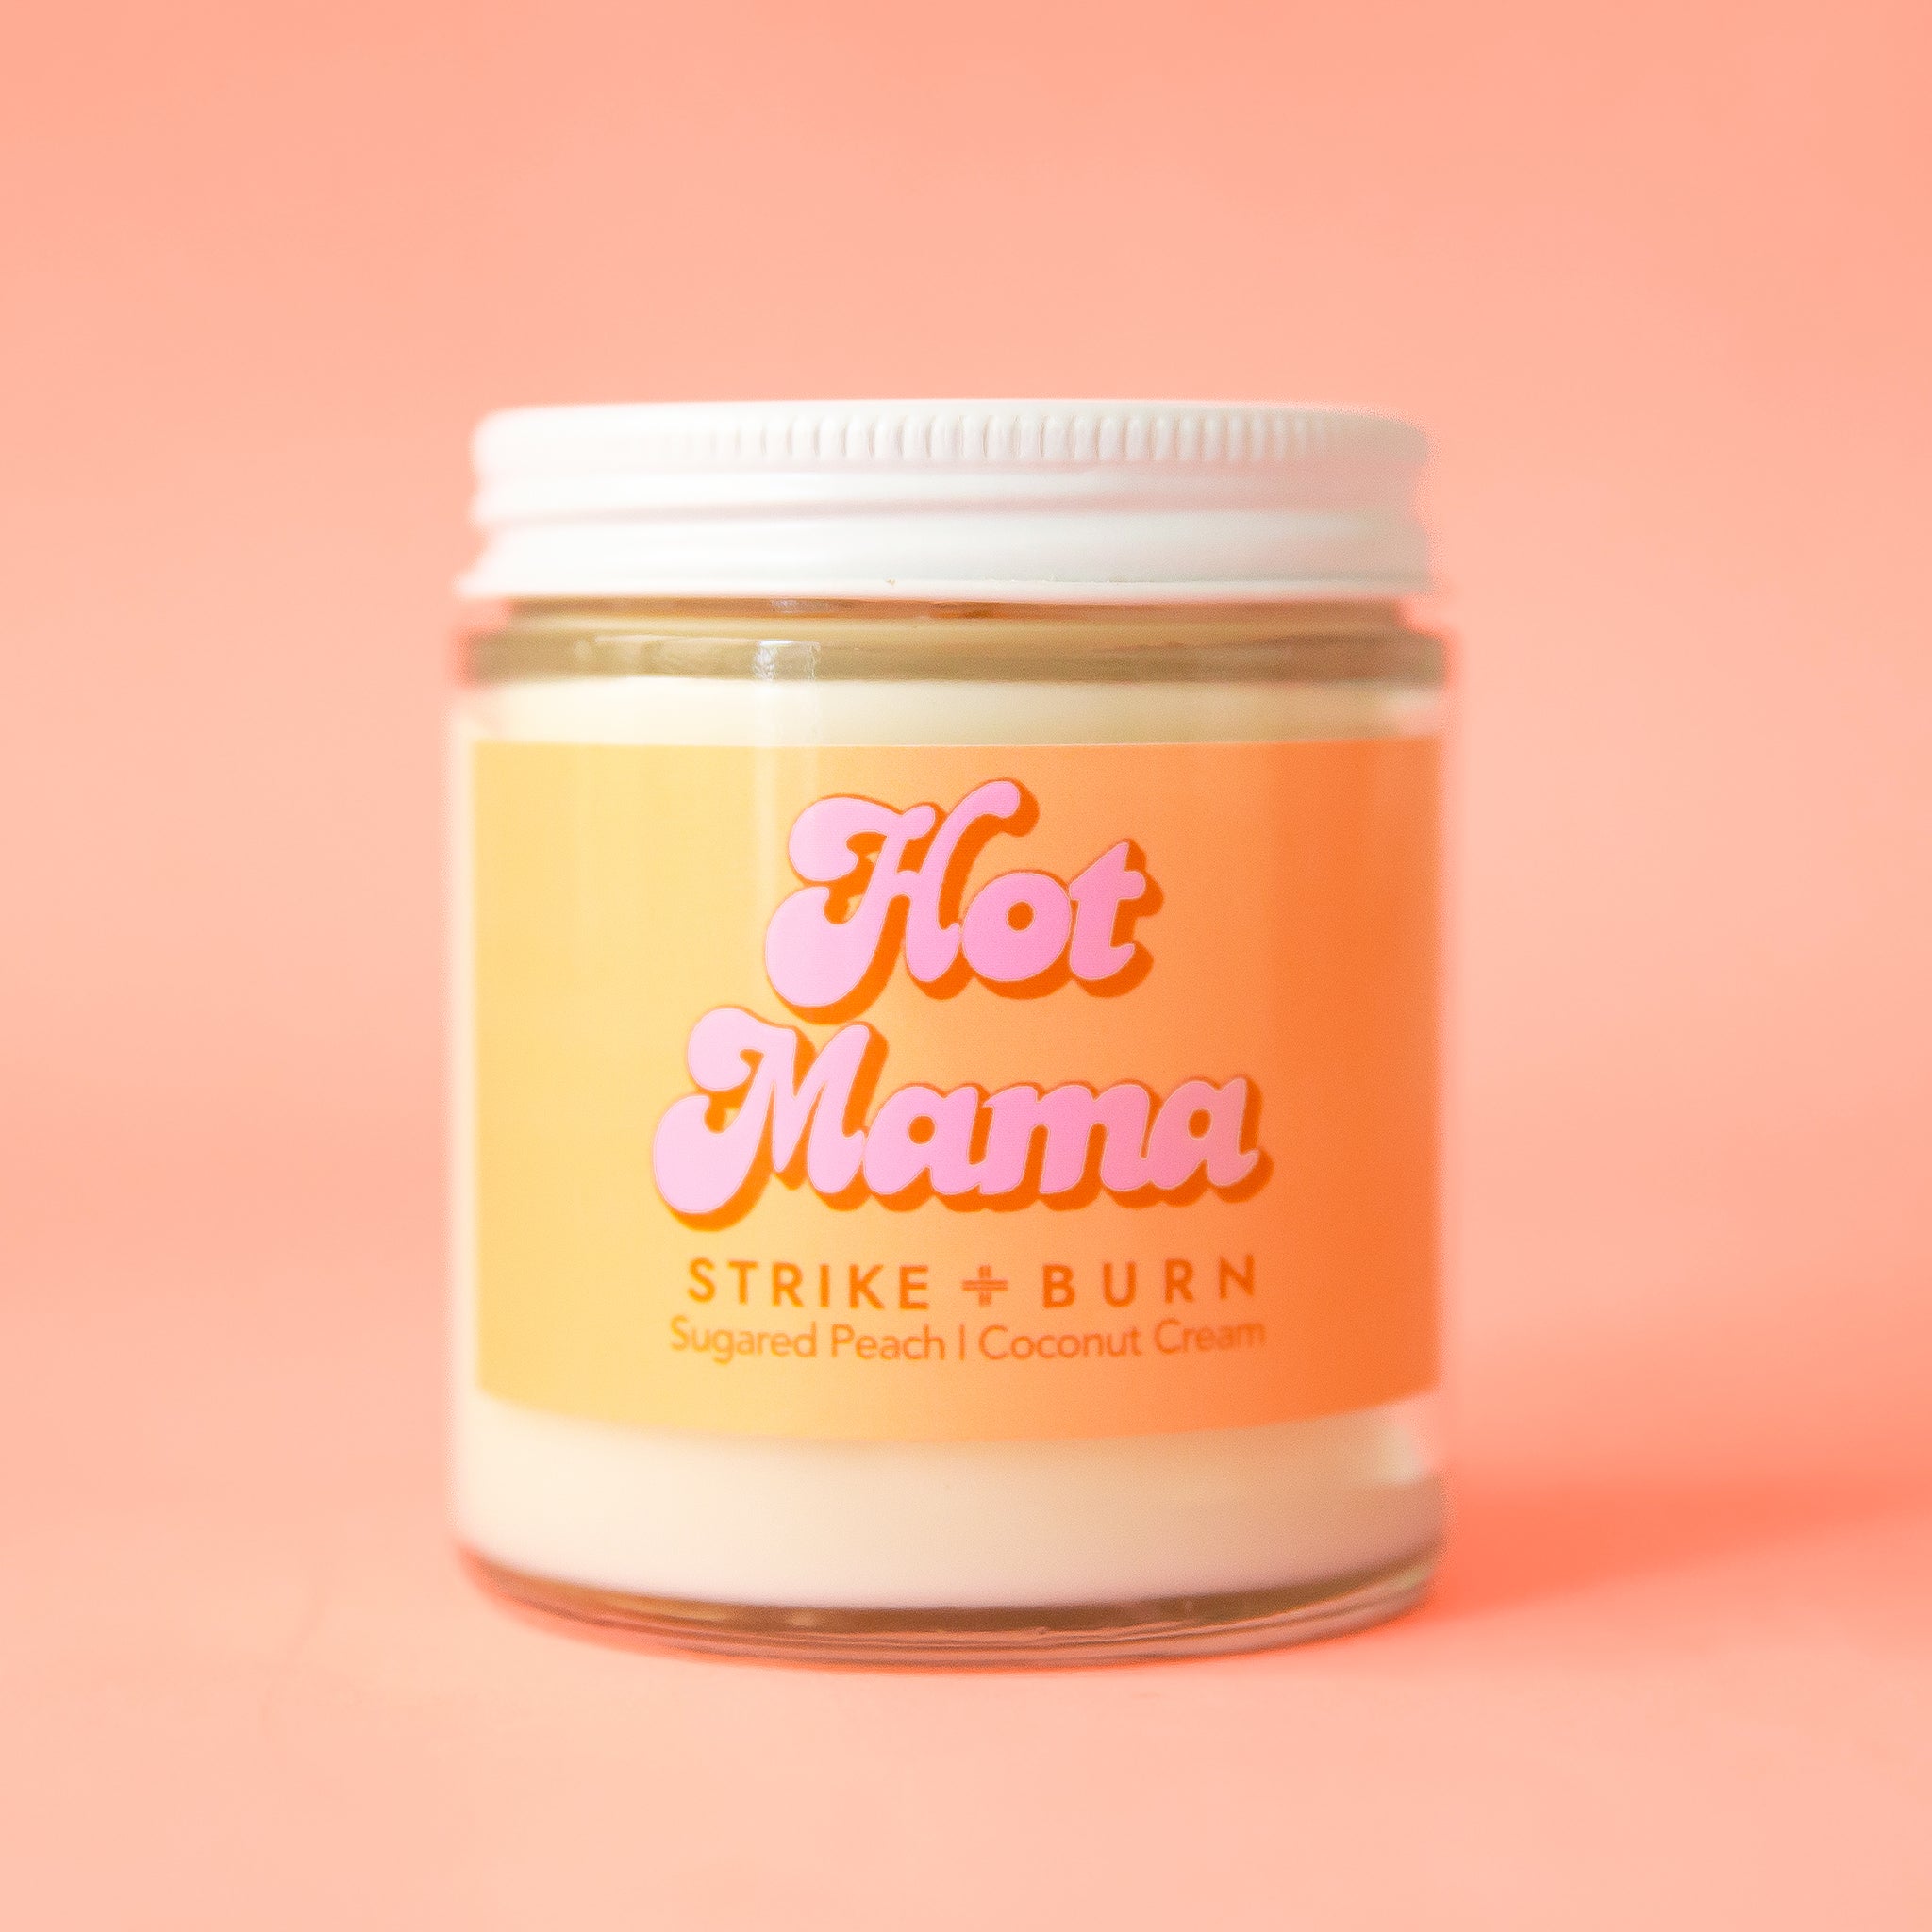 A clear glass jar candle with an orange and pink label that reads, "Hot Mama".